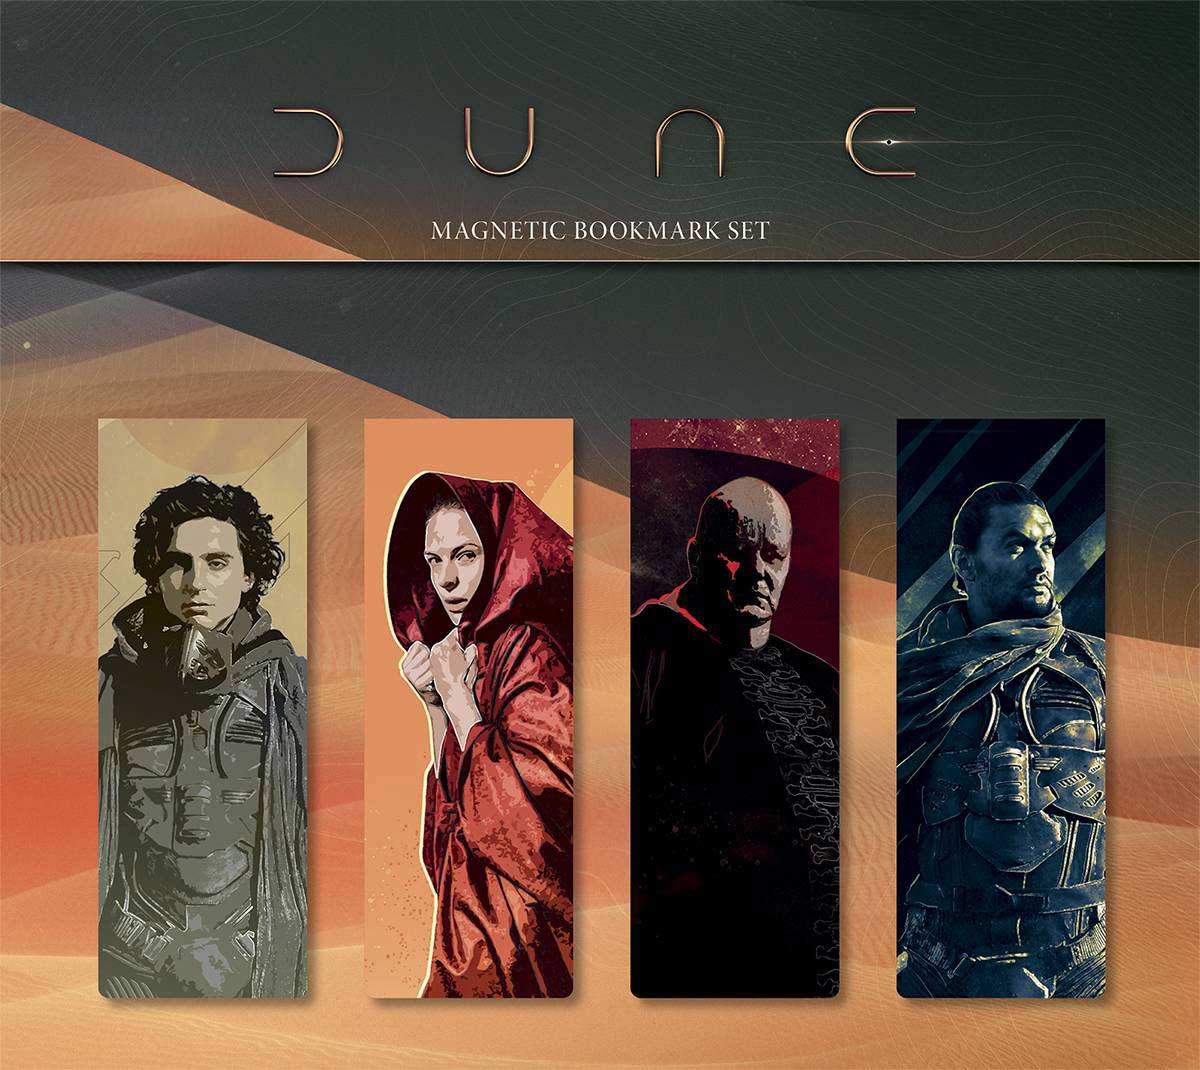 Set of magnetic bookmarks, featuring the main characters of the Dune movie: Paul Atreides, Lady Jessica, Baron Harkonnen, and Duncan Idaho.